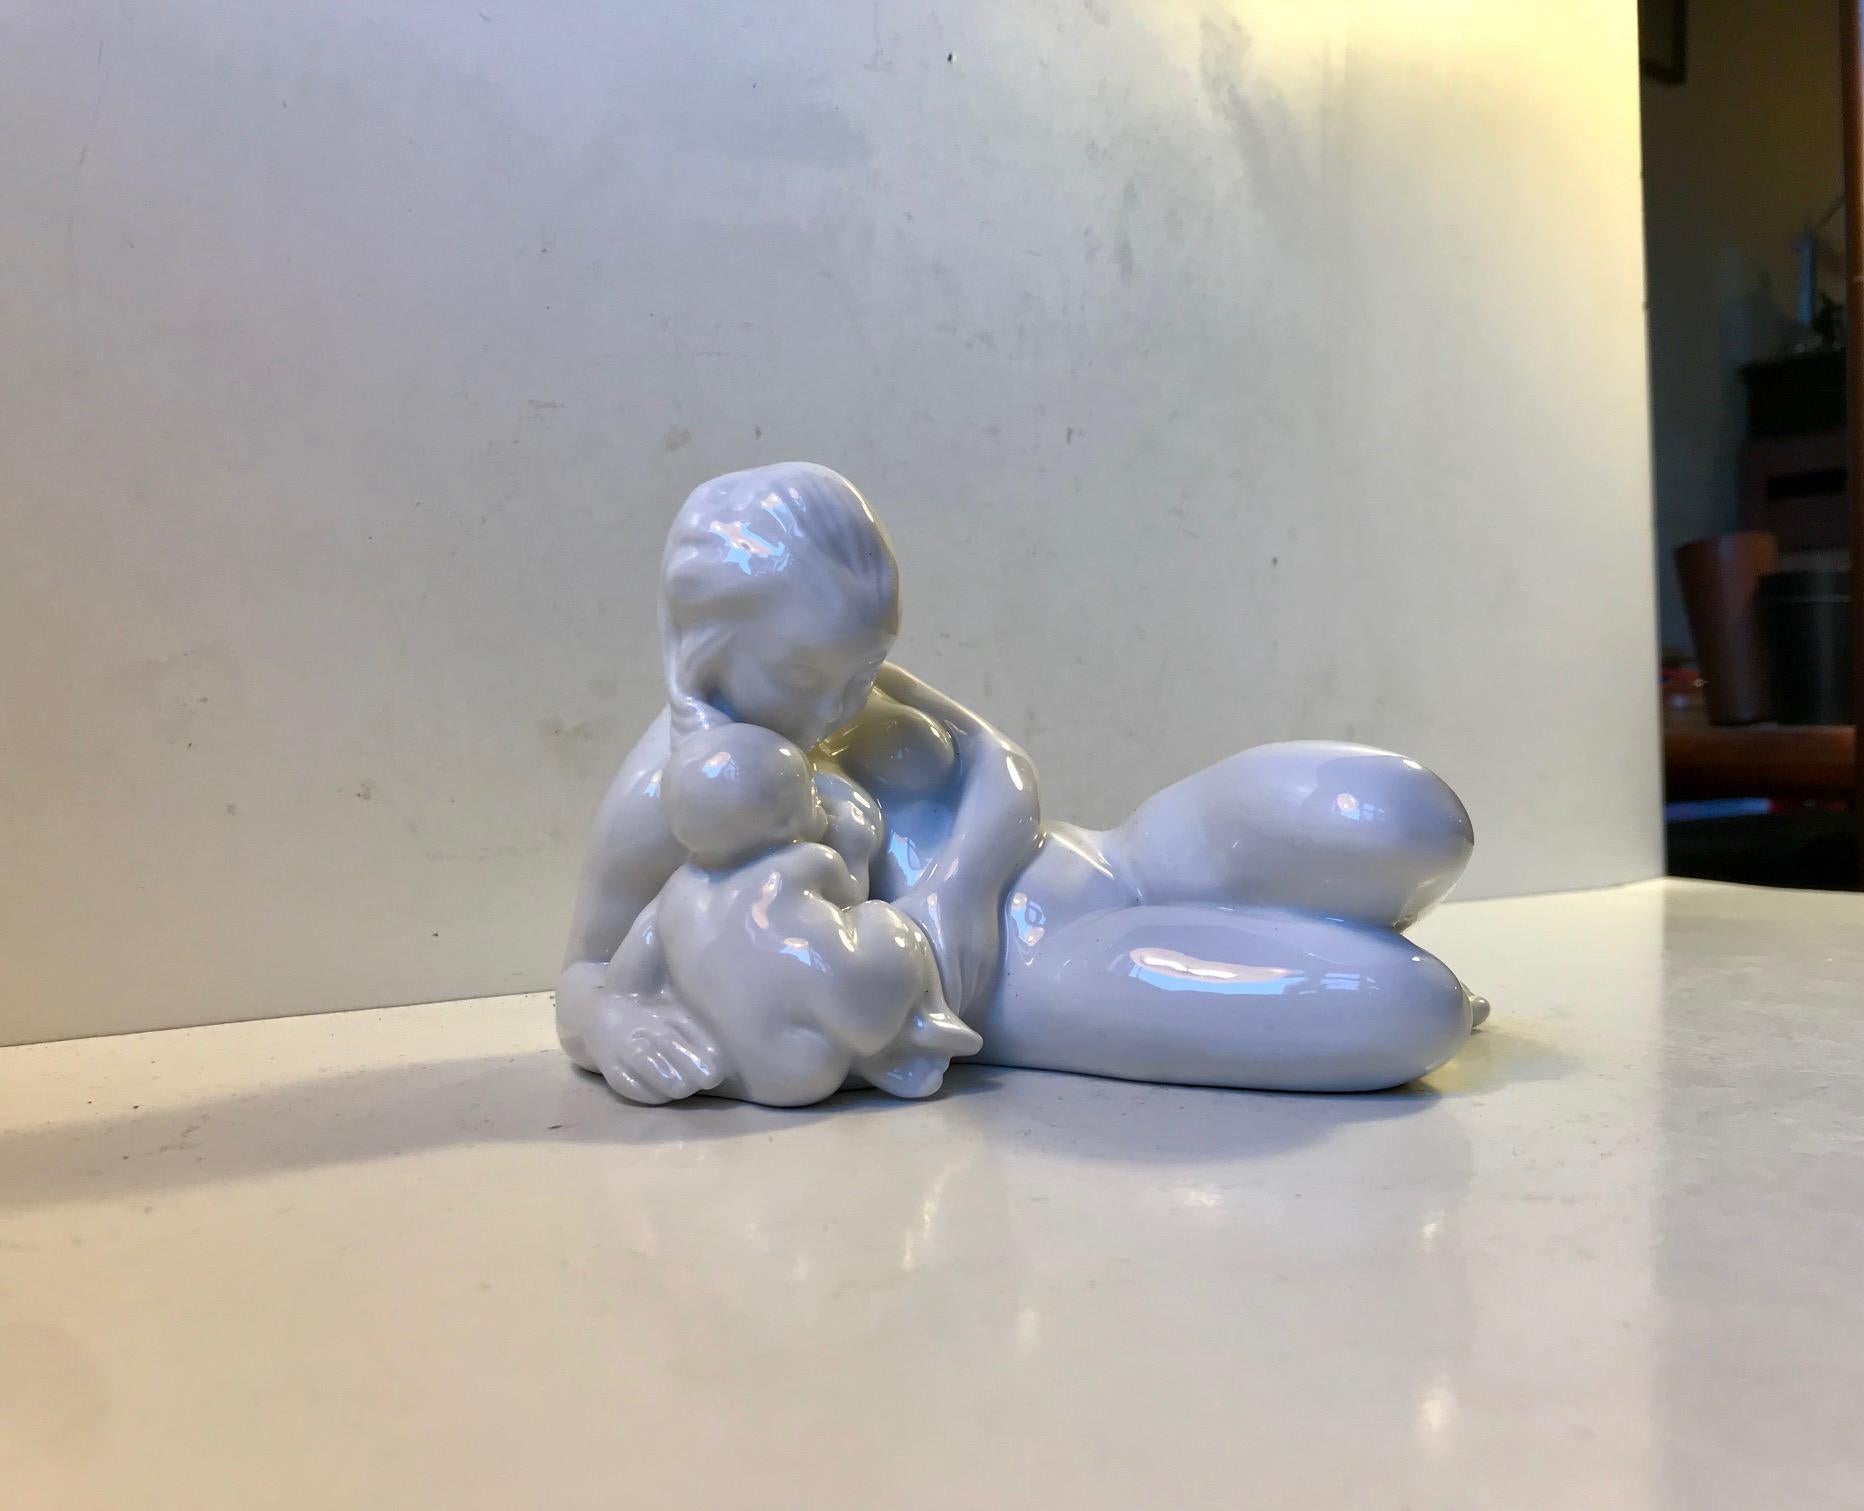 Despite being designed in 1913 this blanc de chine mother and child figurine by the Danish sculptor Kai Nielsen has and striking clean and modern appearance about it. Subtle Art Nouveau almost Art Deco in its organic lines and curvature. This one is